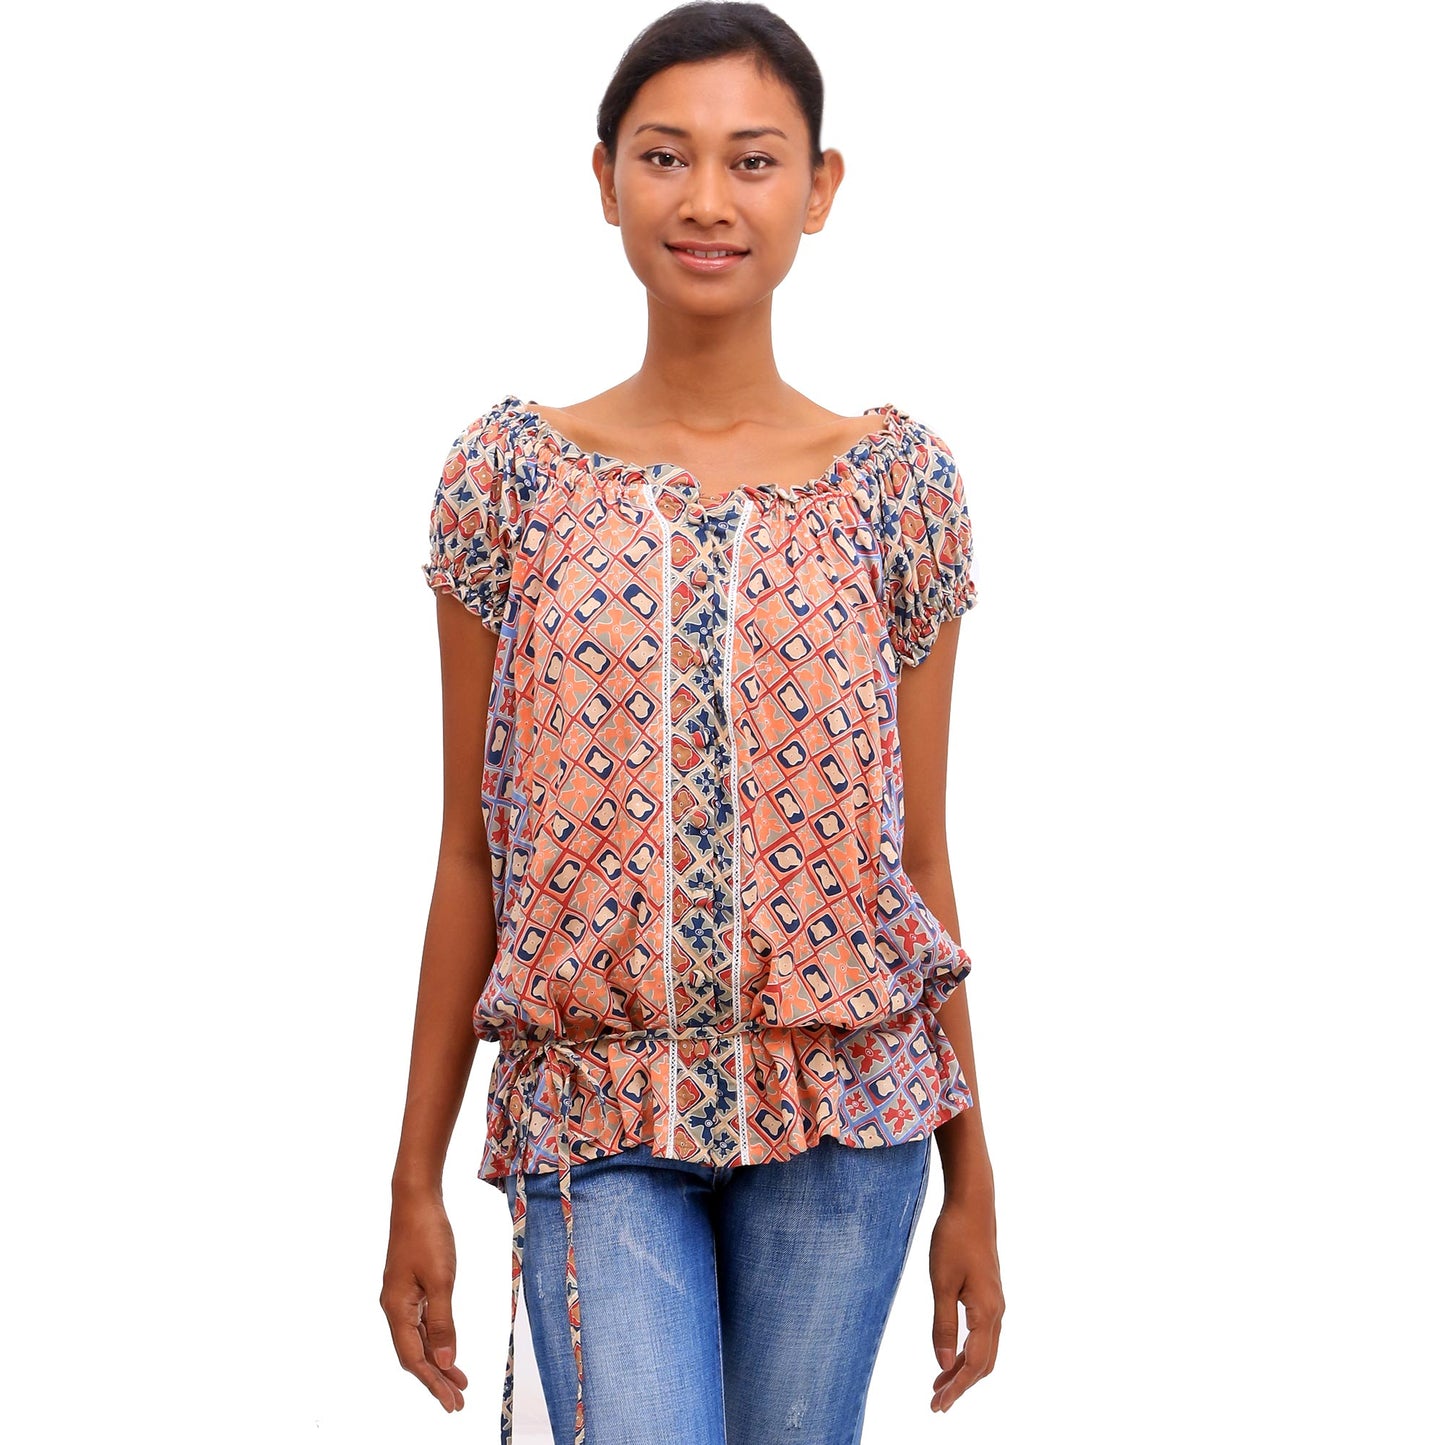 Kelud Crisscross Chili and Azure Rayon Off-The-Shoulder Blouse from Bali